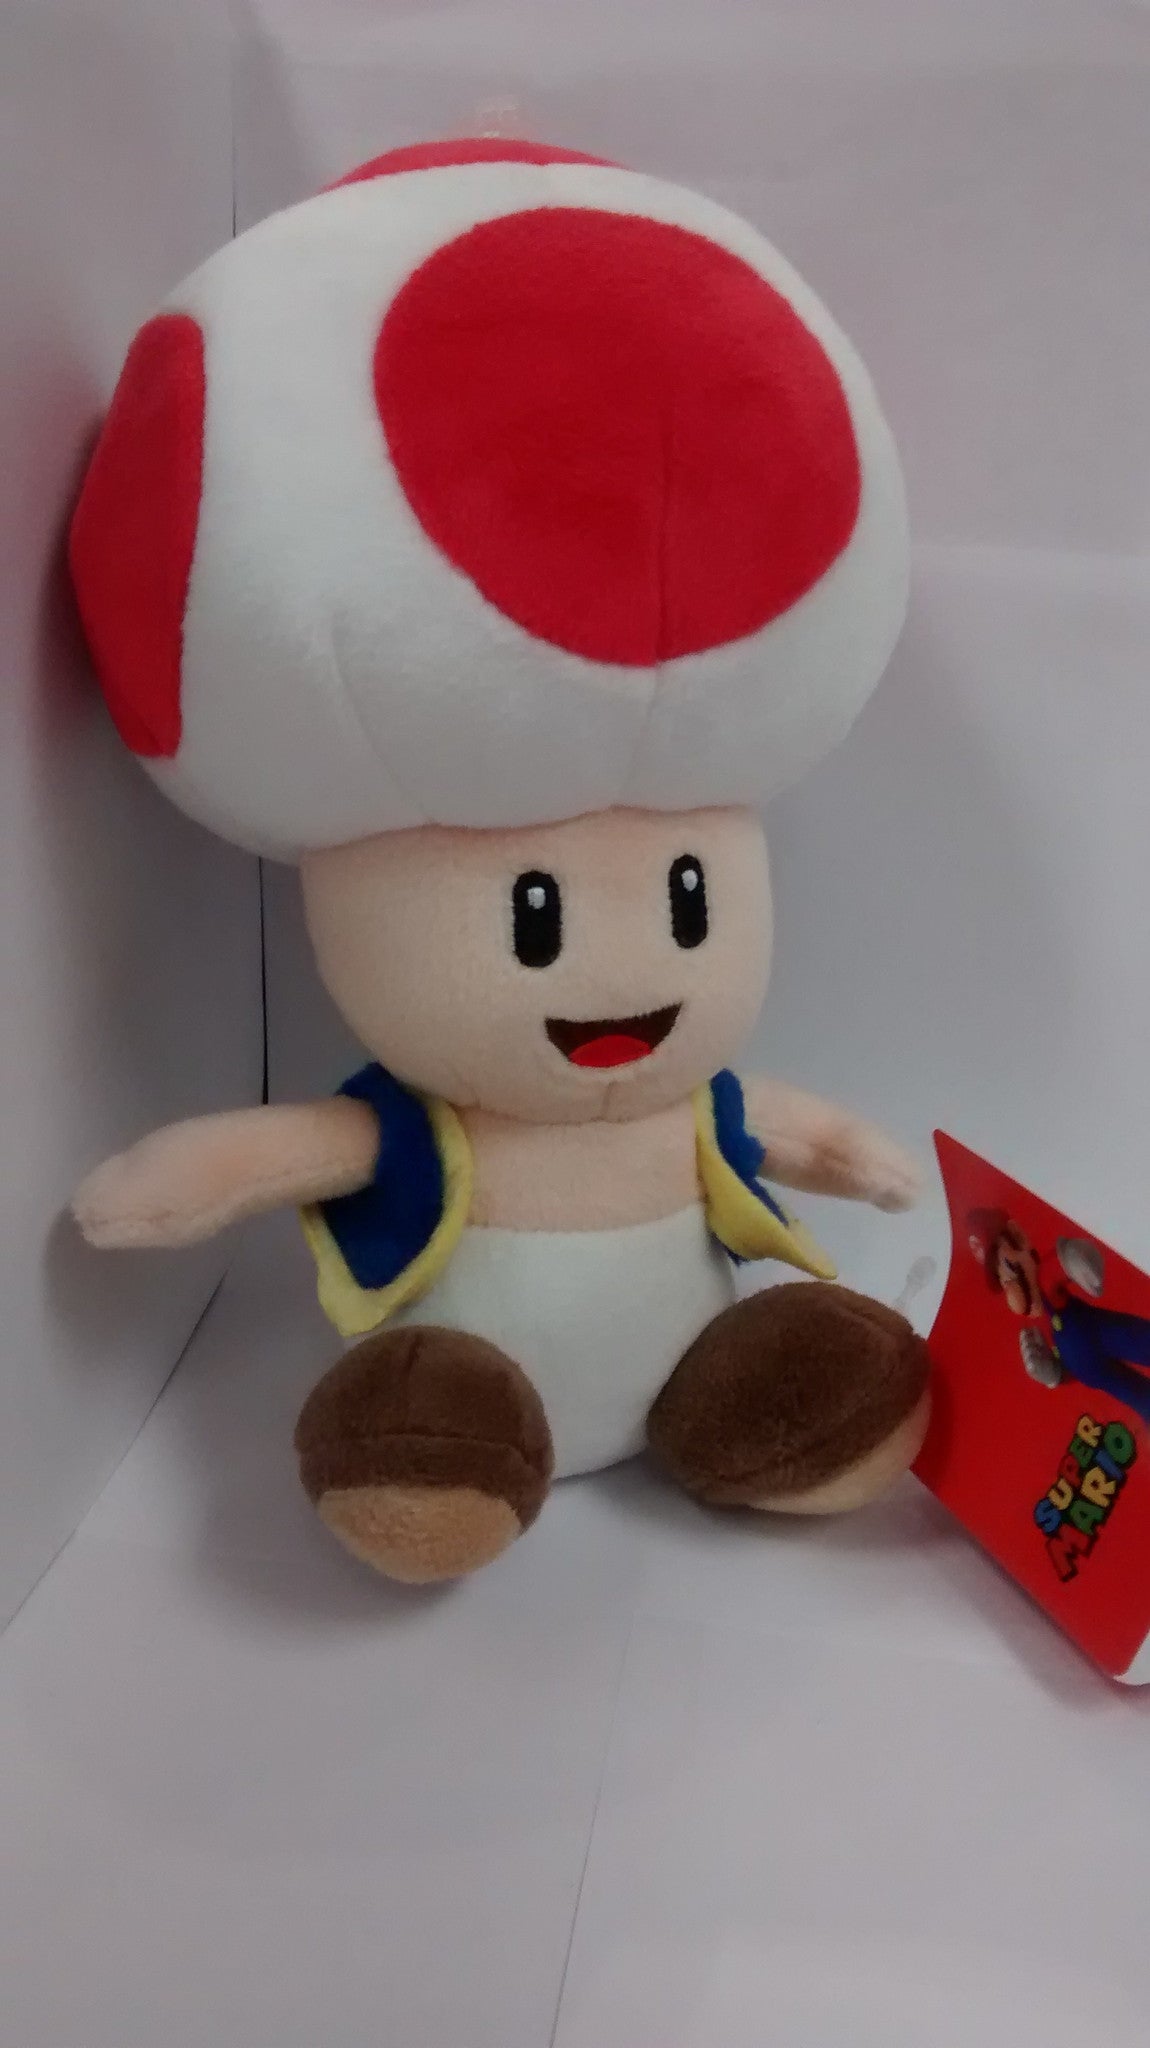 Super Mario Bros.: Toad 7 Plush – Chibi's Anime Goods and Collectibles